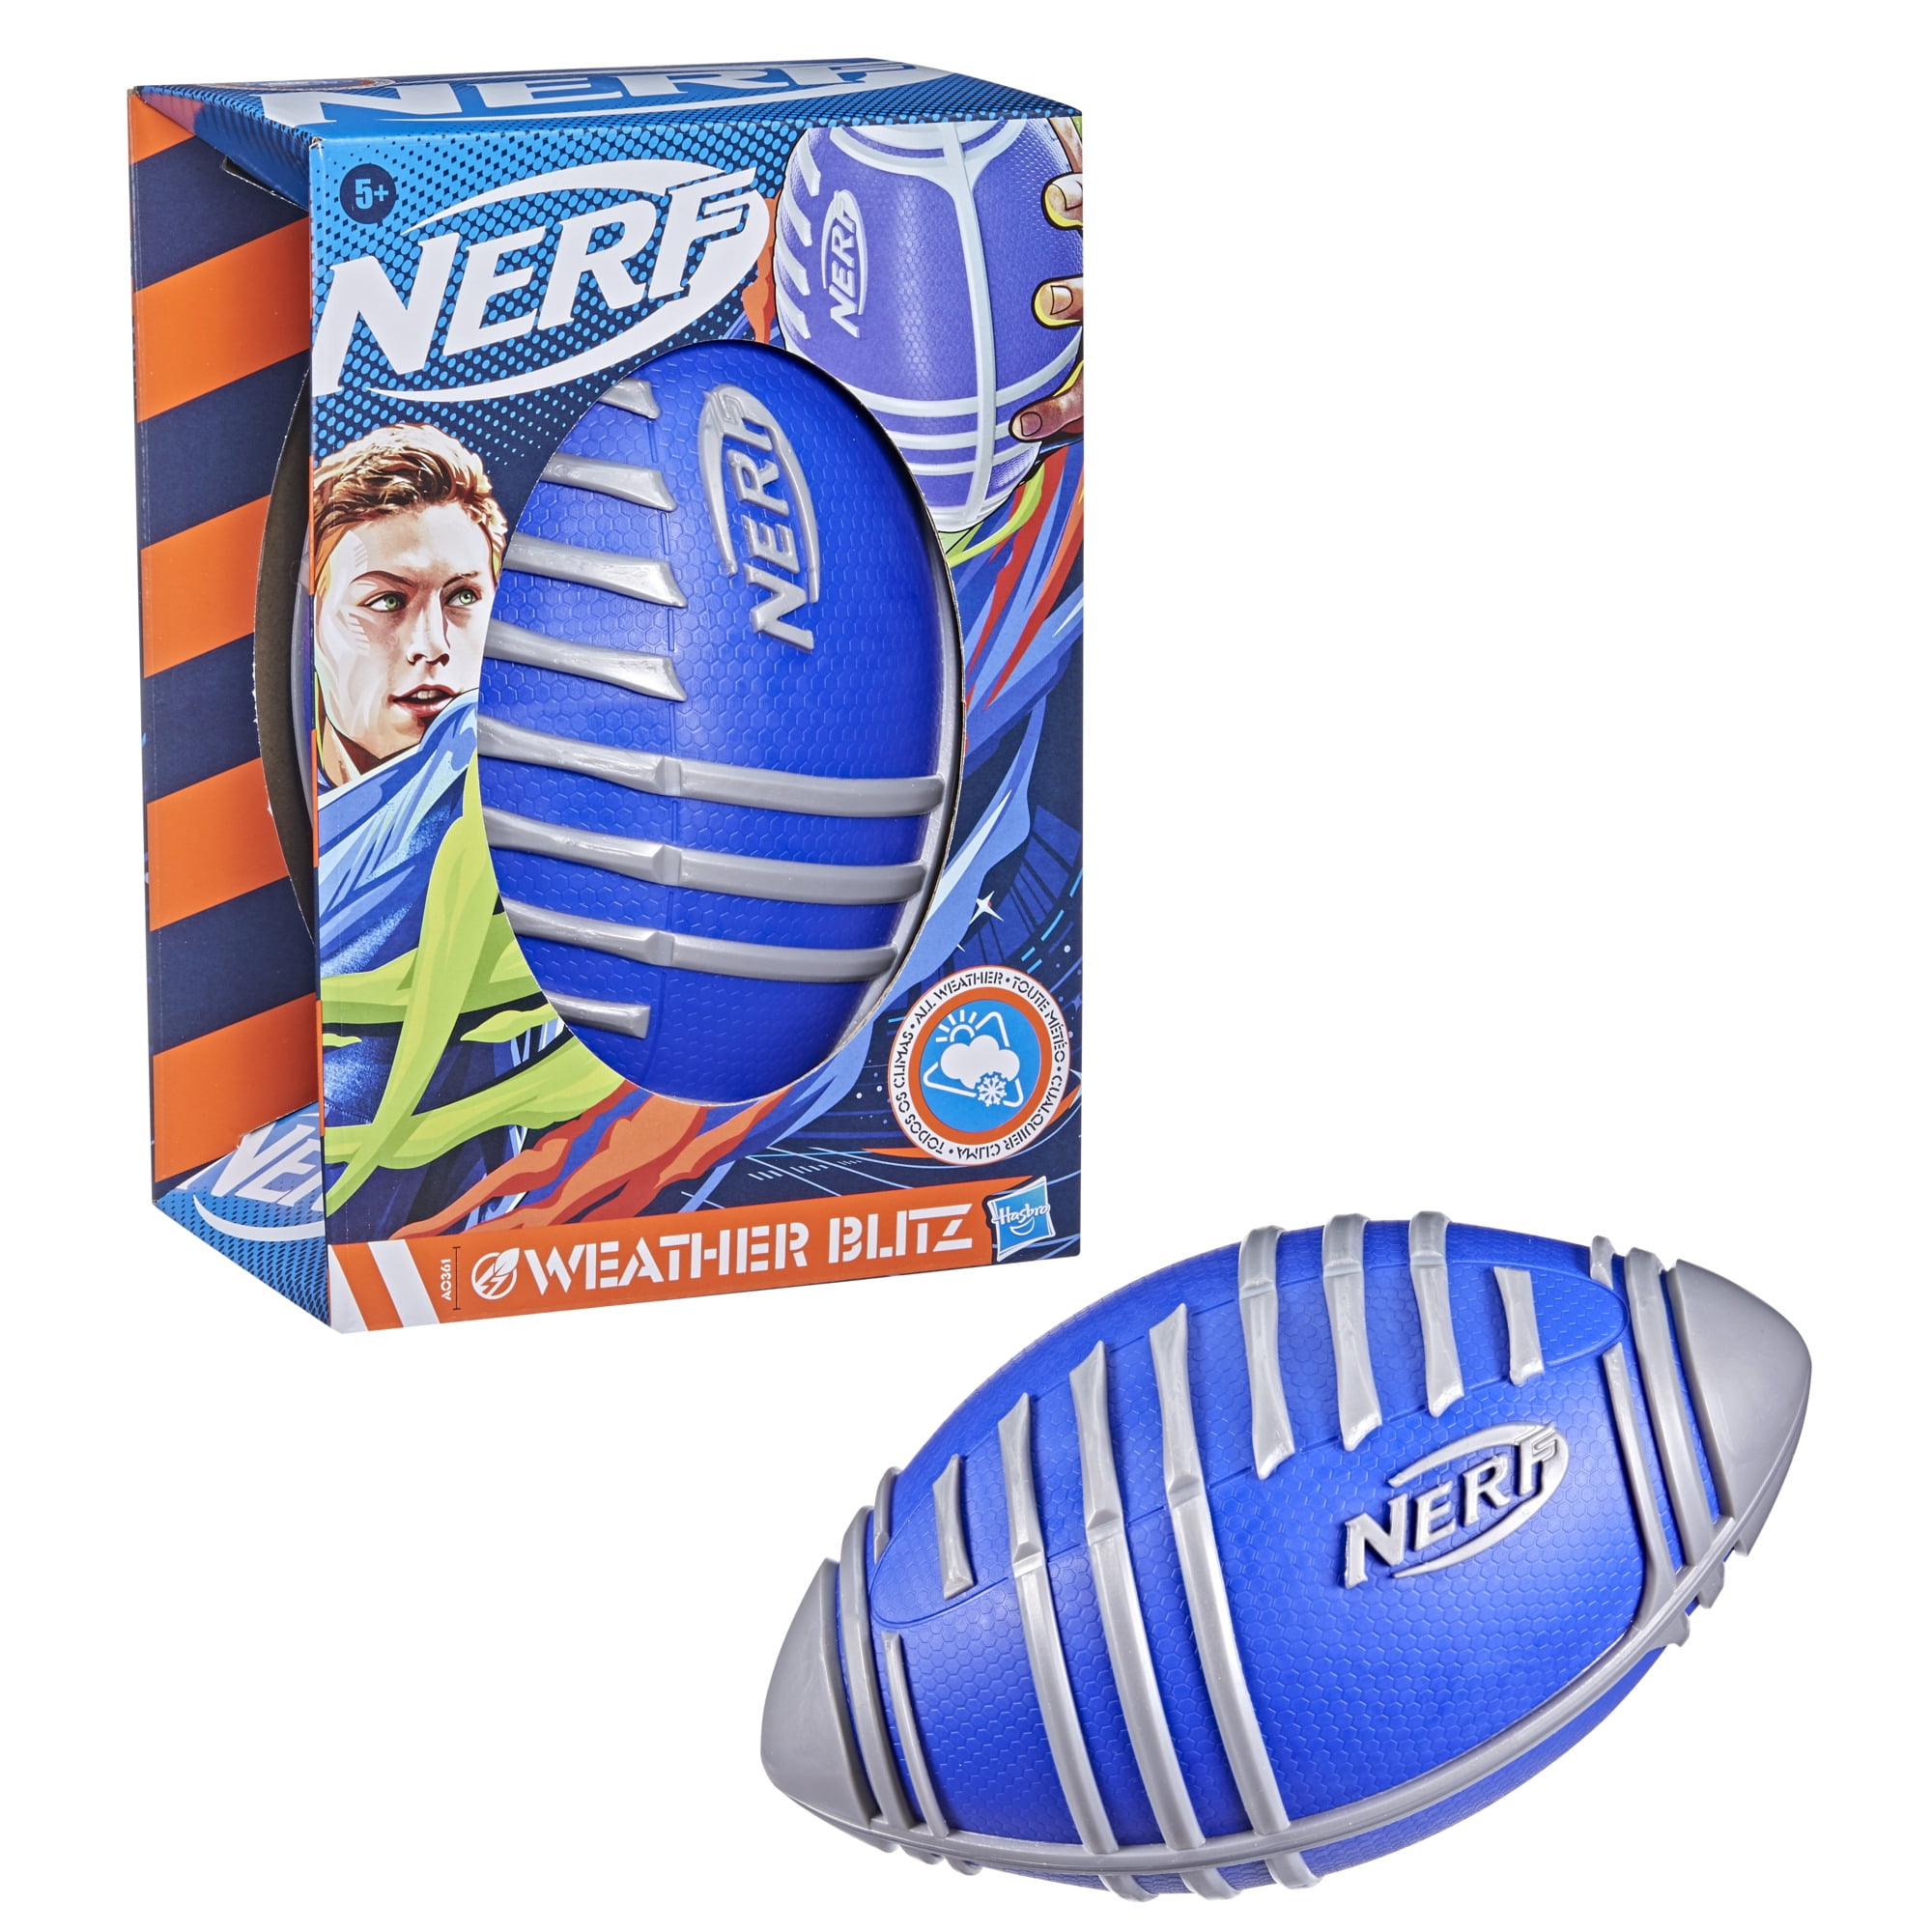  NERF Vortex Ultimate Grip Foam Football - NERF Soft Vortex  Football for Long-Distance Throws - All-Weather Perfect for Pool + Beach  Football - Kids Ultimate Grip Whistle Vortex Foam Ball 